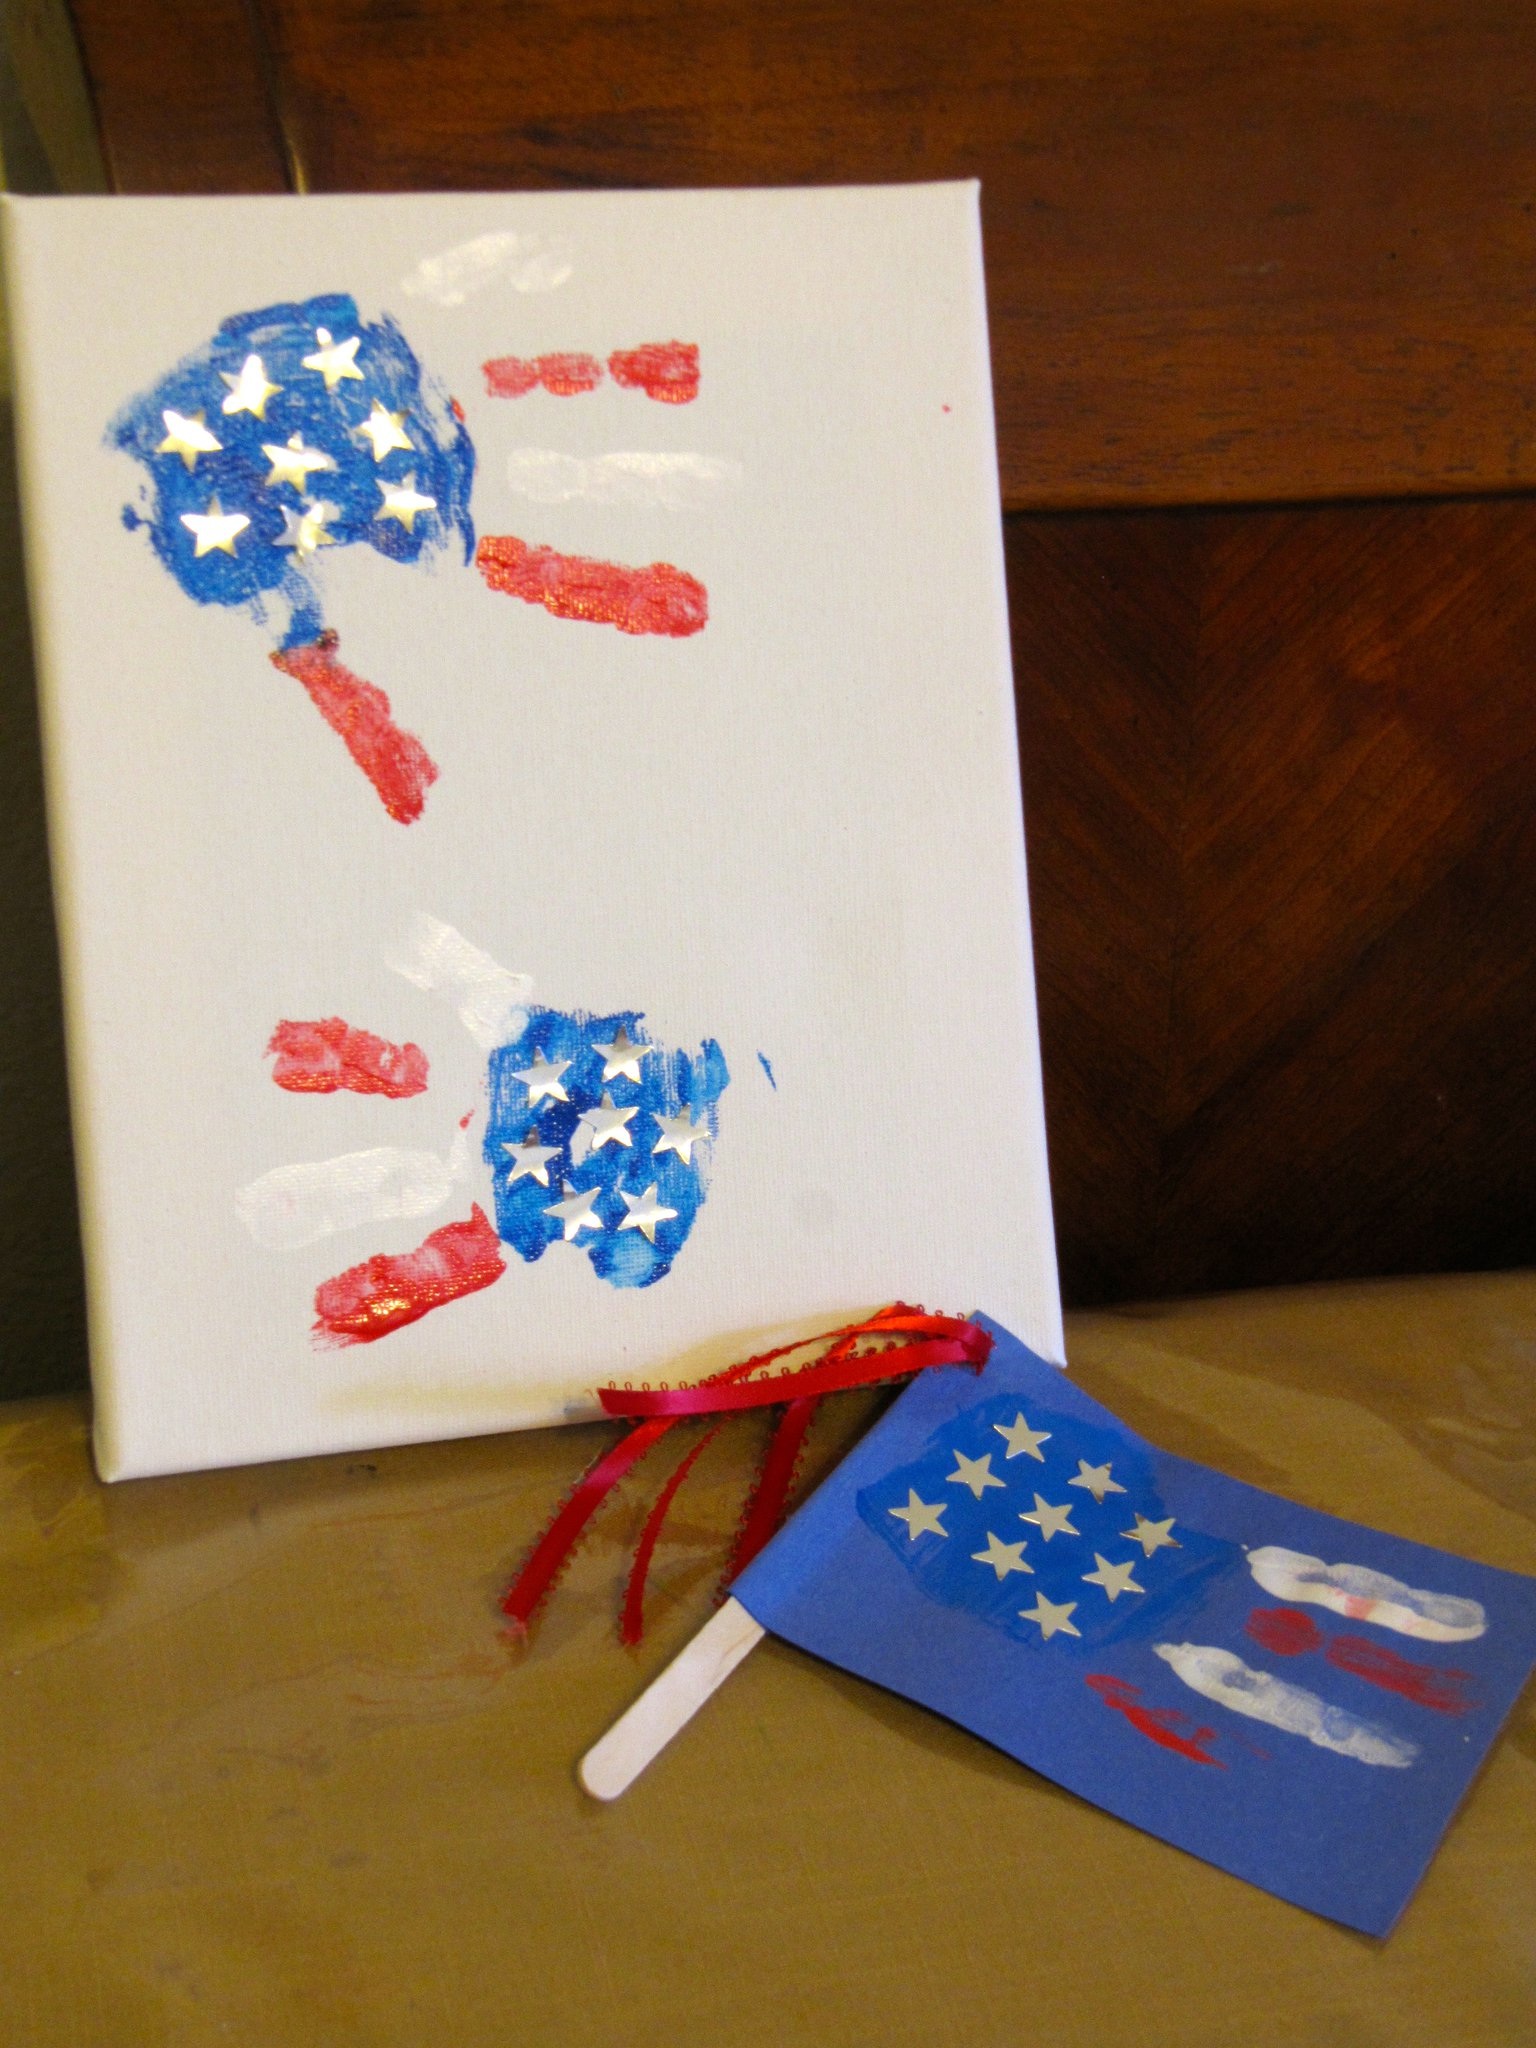 4th of July Crafts: Star-Spangled Banner